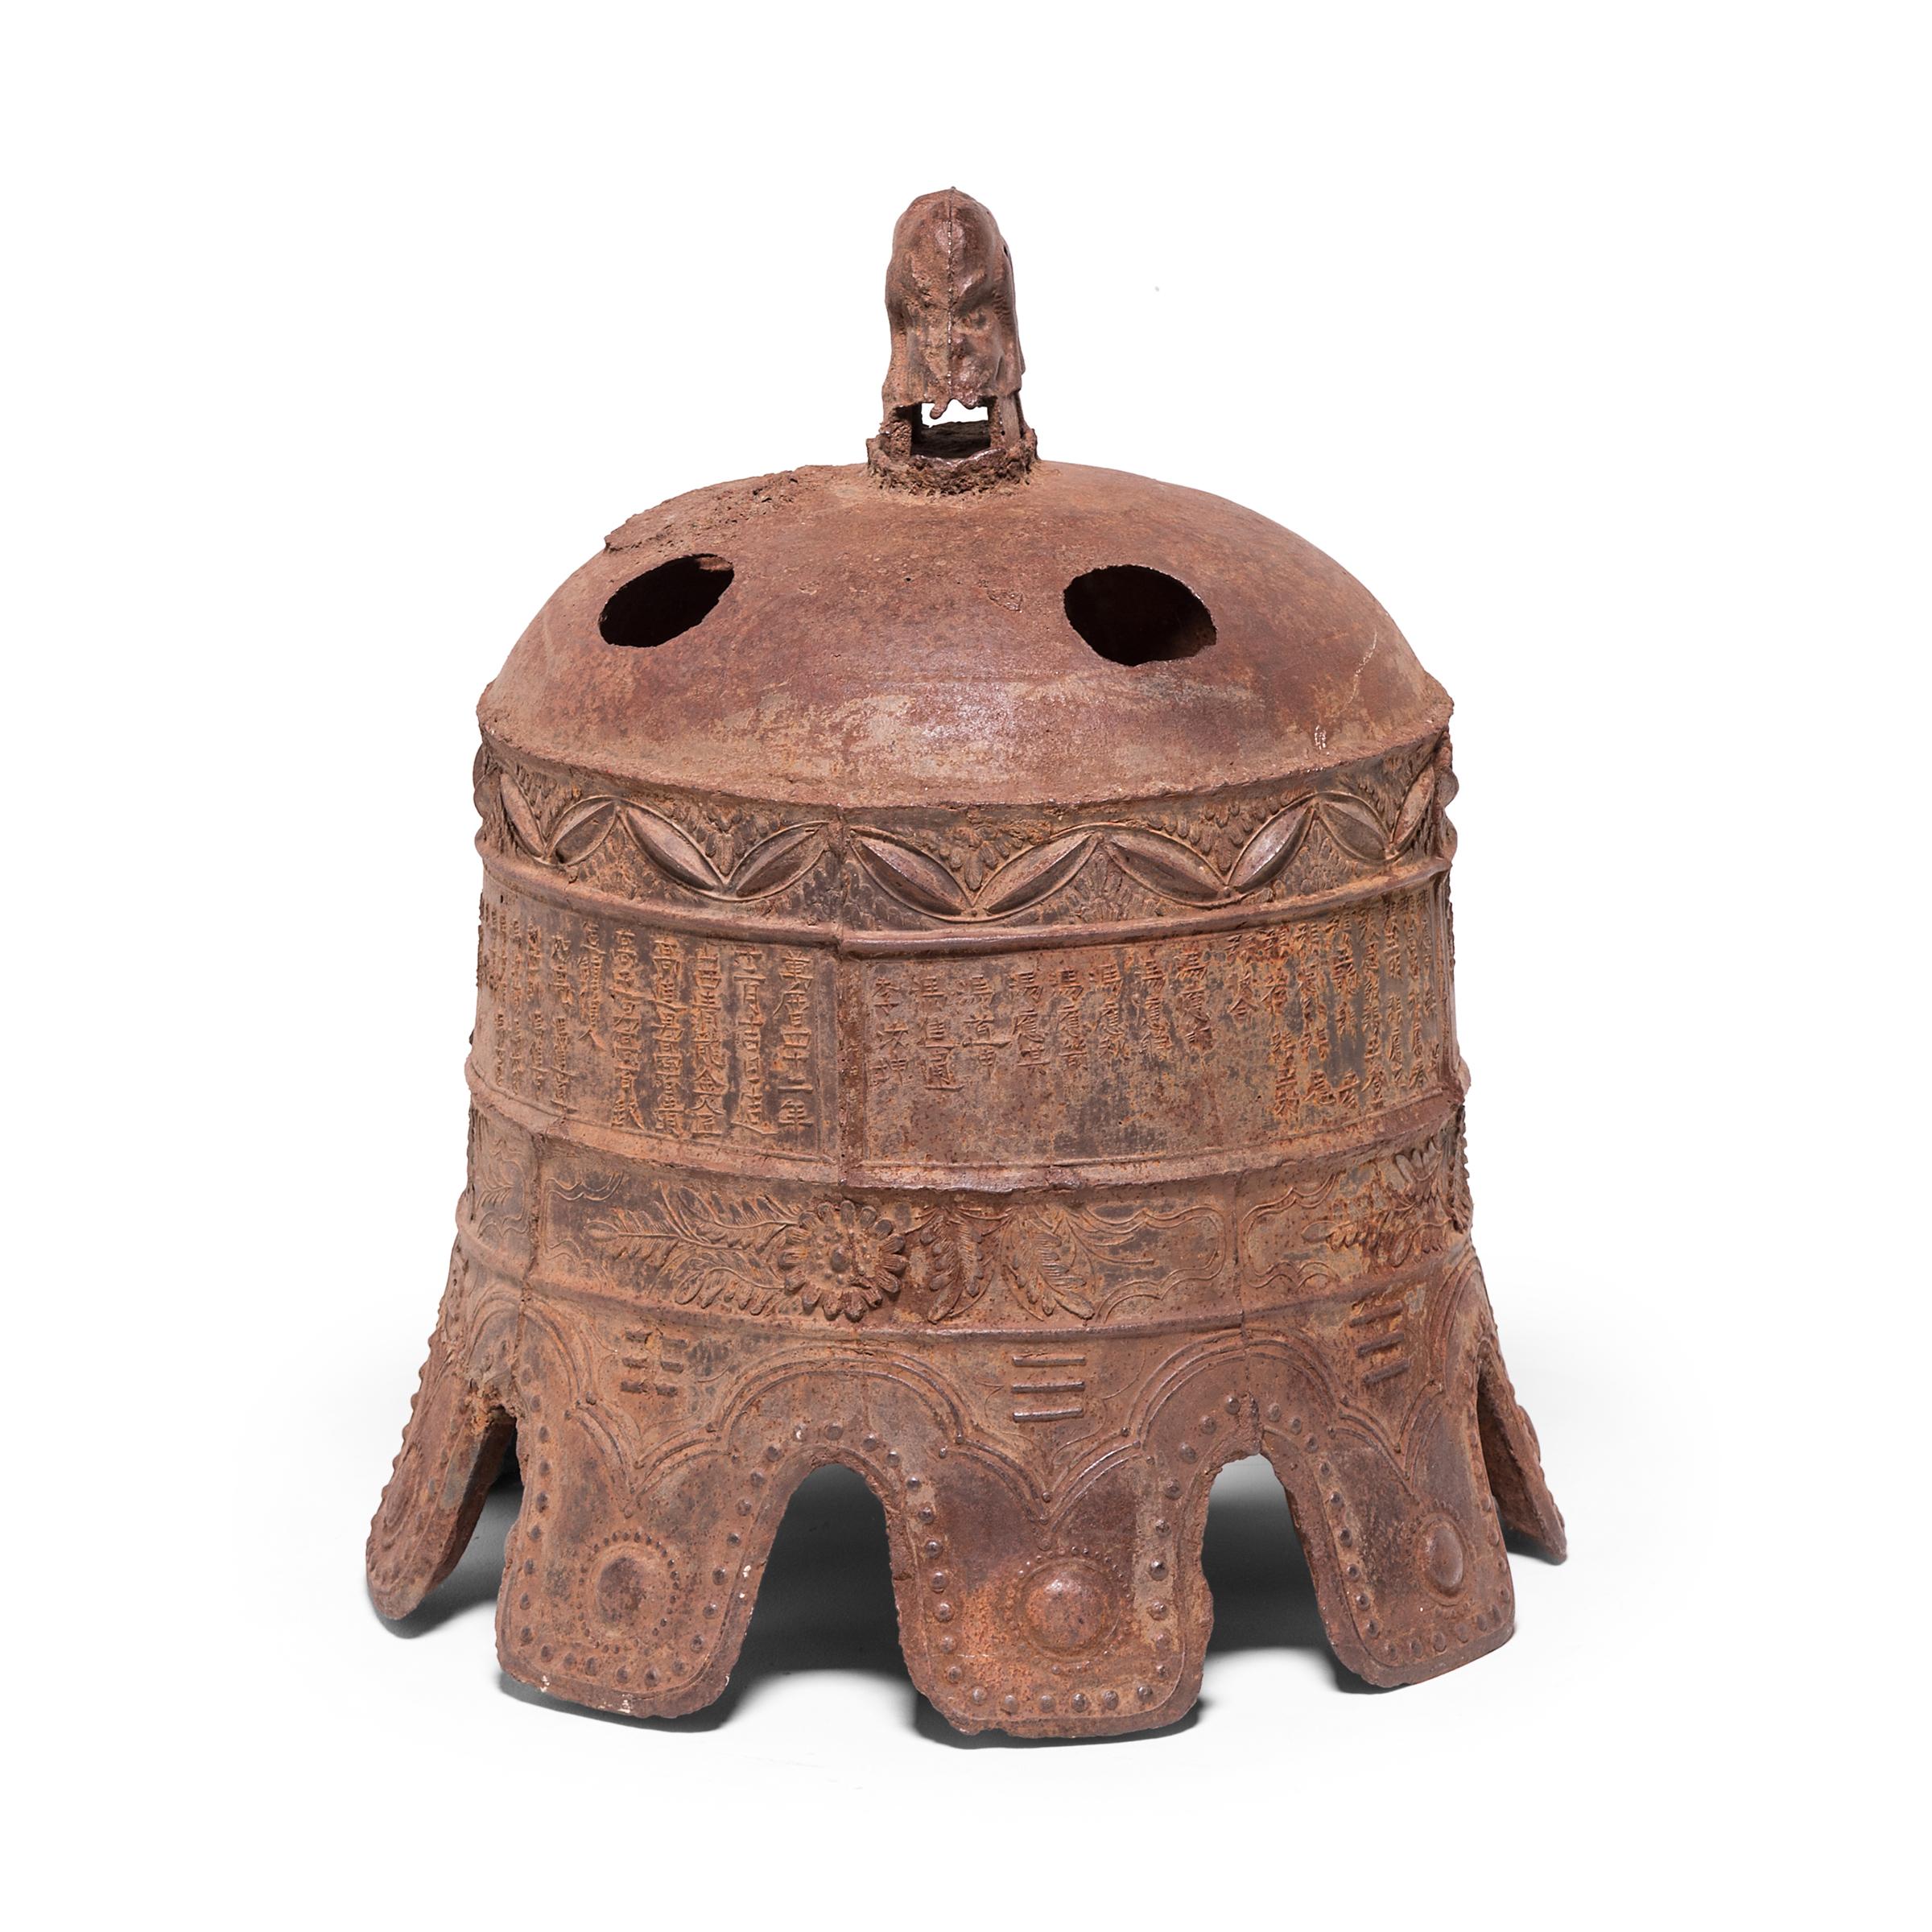 A cast iron bell, when struck with a wooden beam, announced the time of day to villagers. This monumental example is covered in relief casts of chrysanthemum blossoms and characters explaining that the piece was cast in 1613, the 42nd year of the